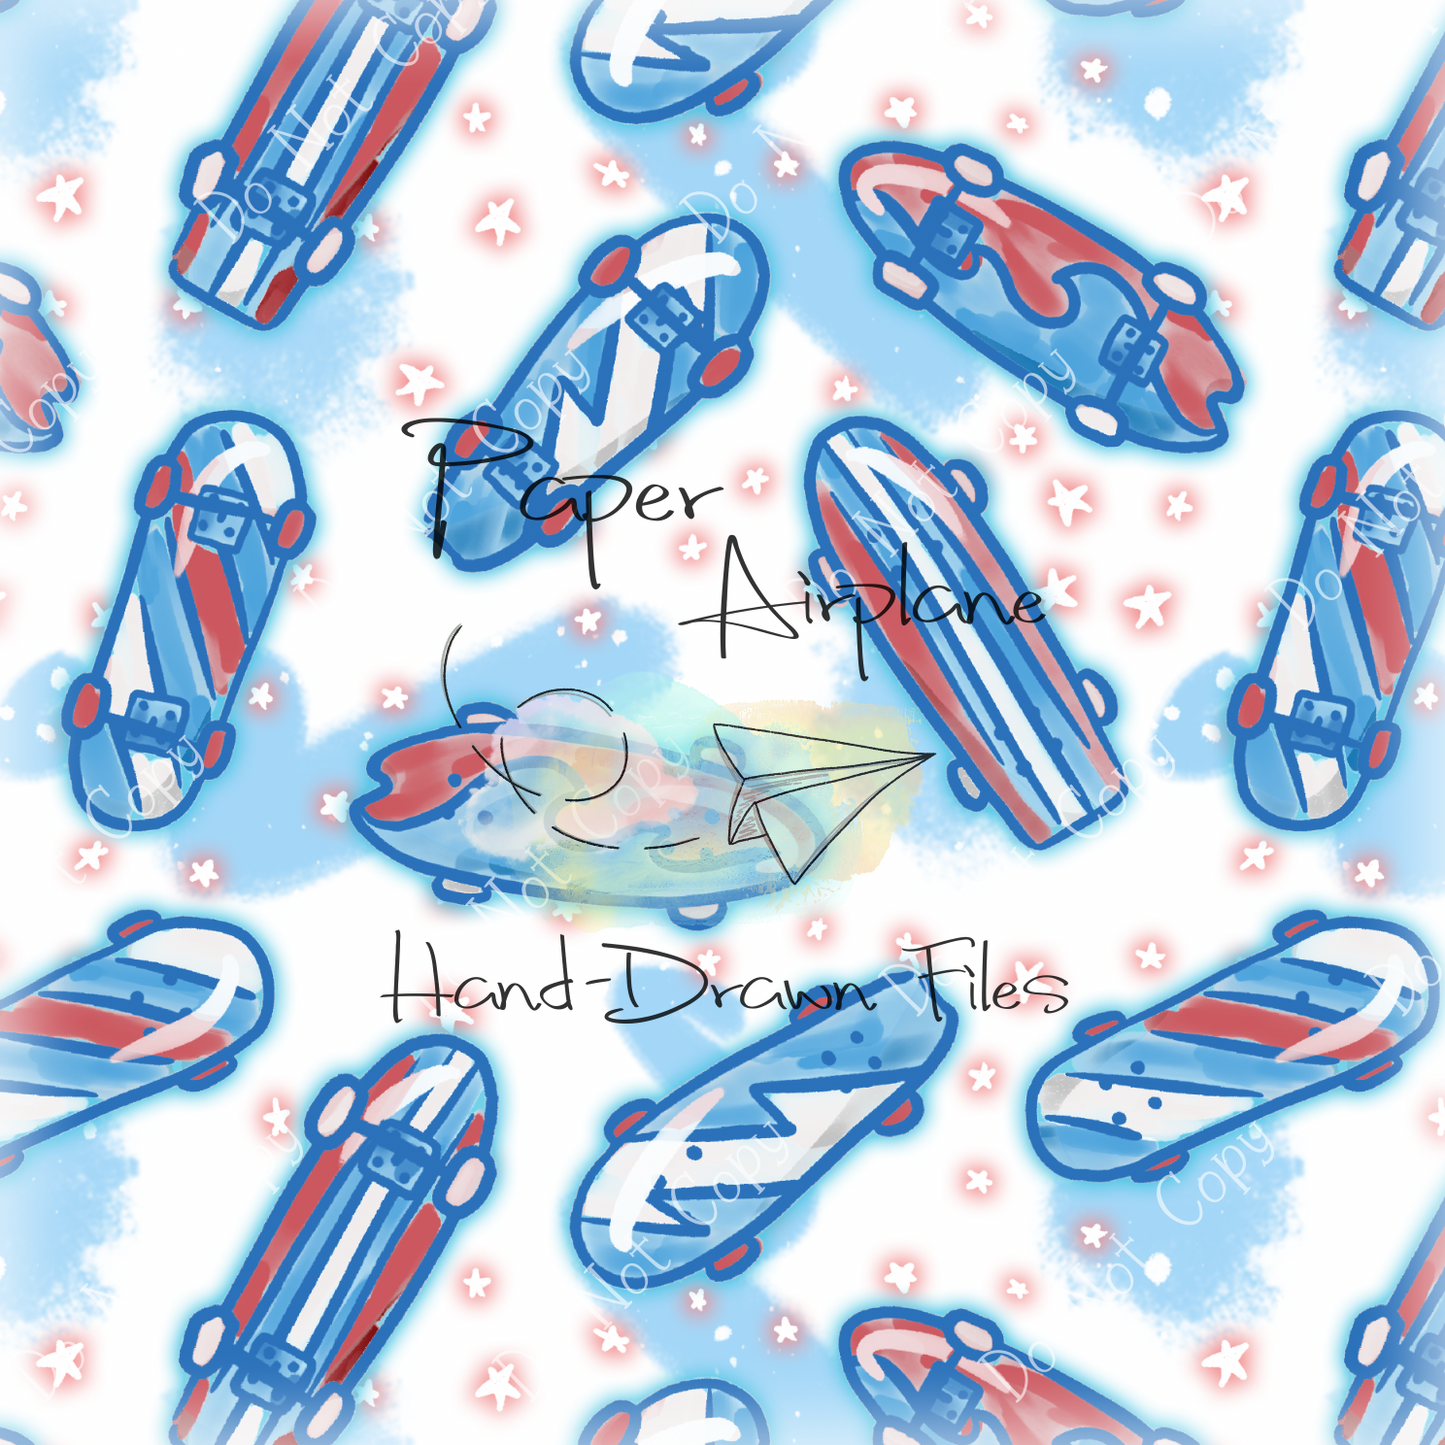 Skateboards (Blue and Red Pastel)